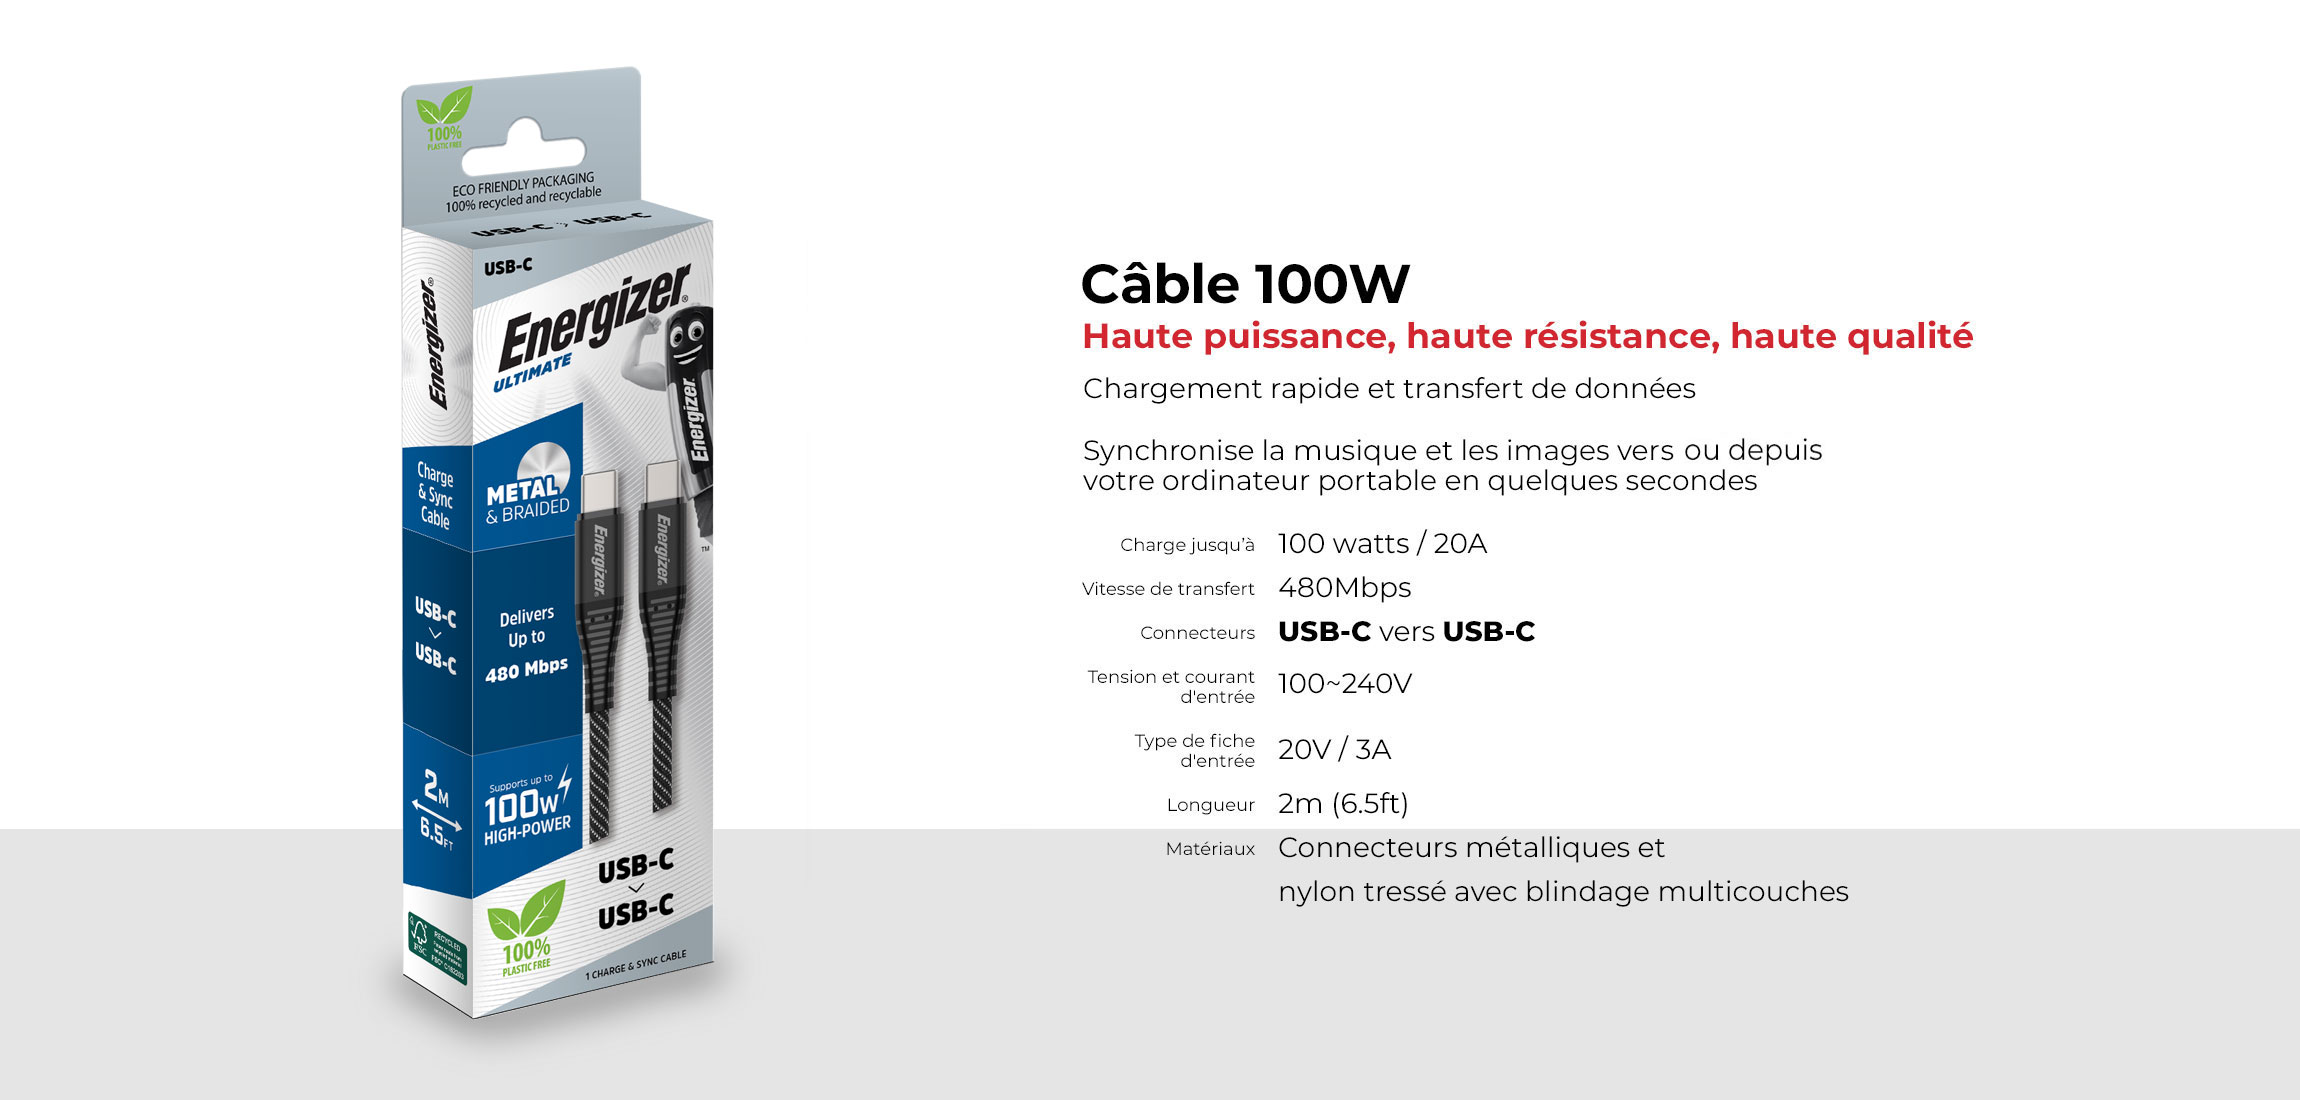 AT-cable-100W-pack-FR.jpg